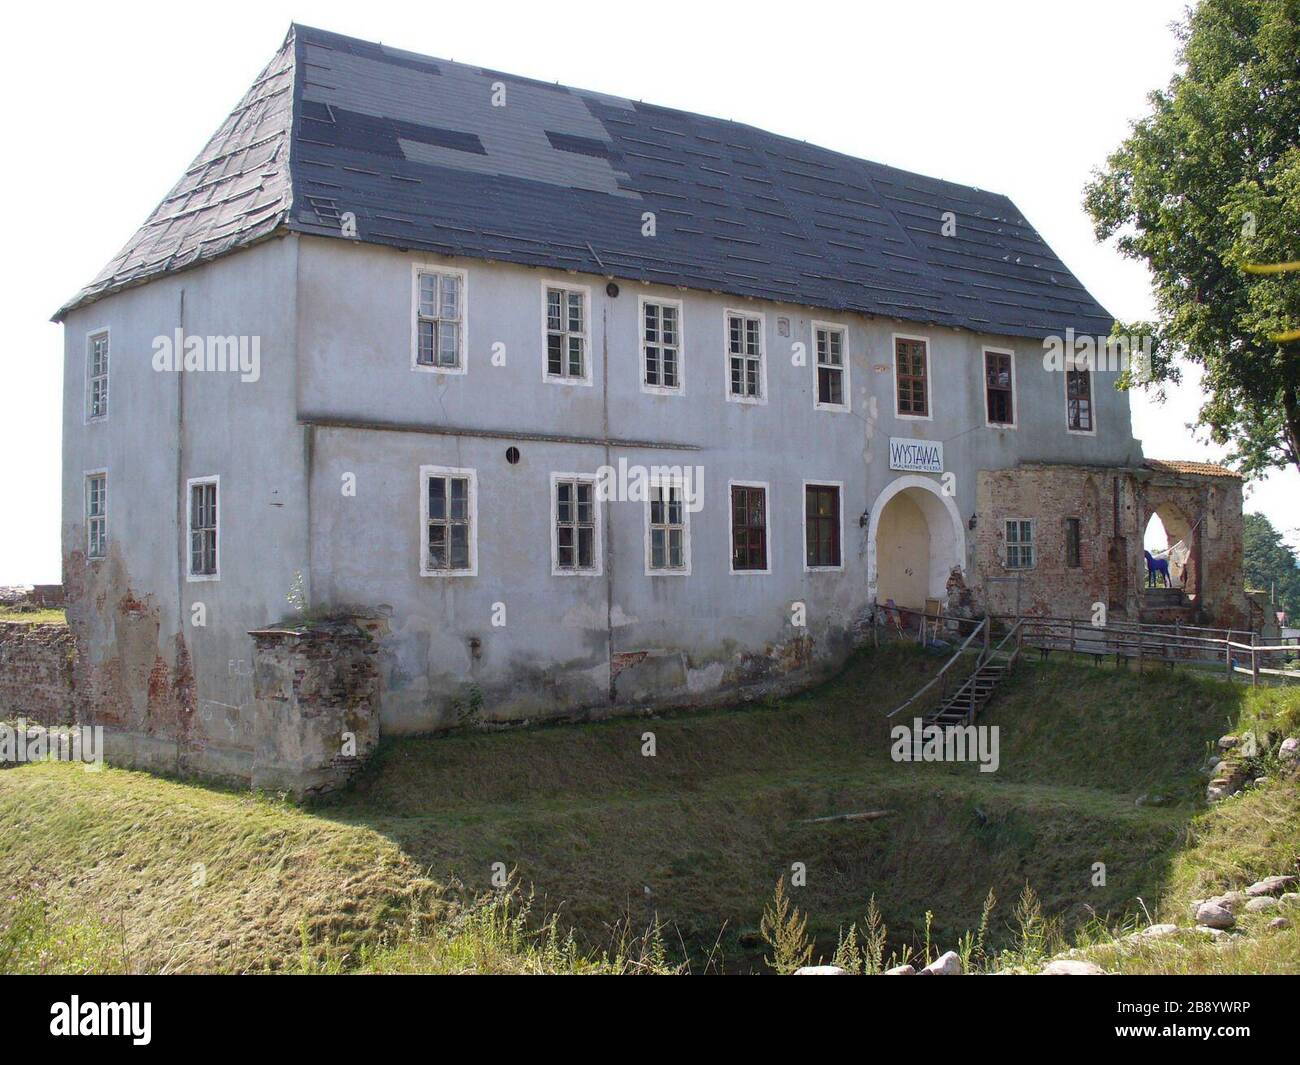 18 august 2006 hi-res stock photography and images - Alamy